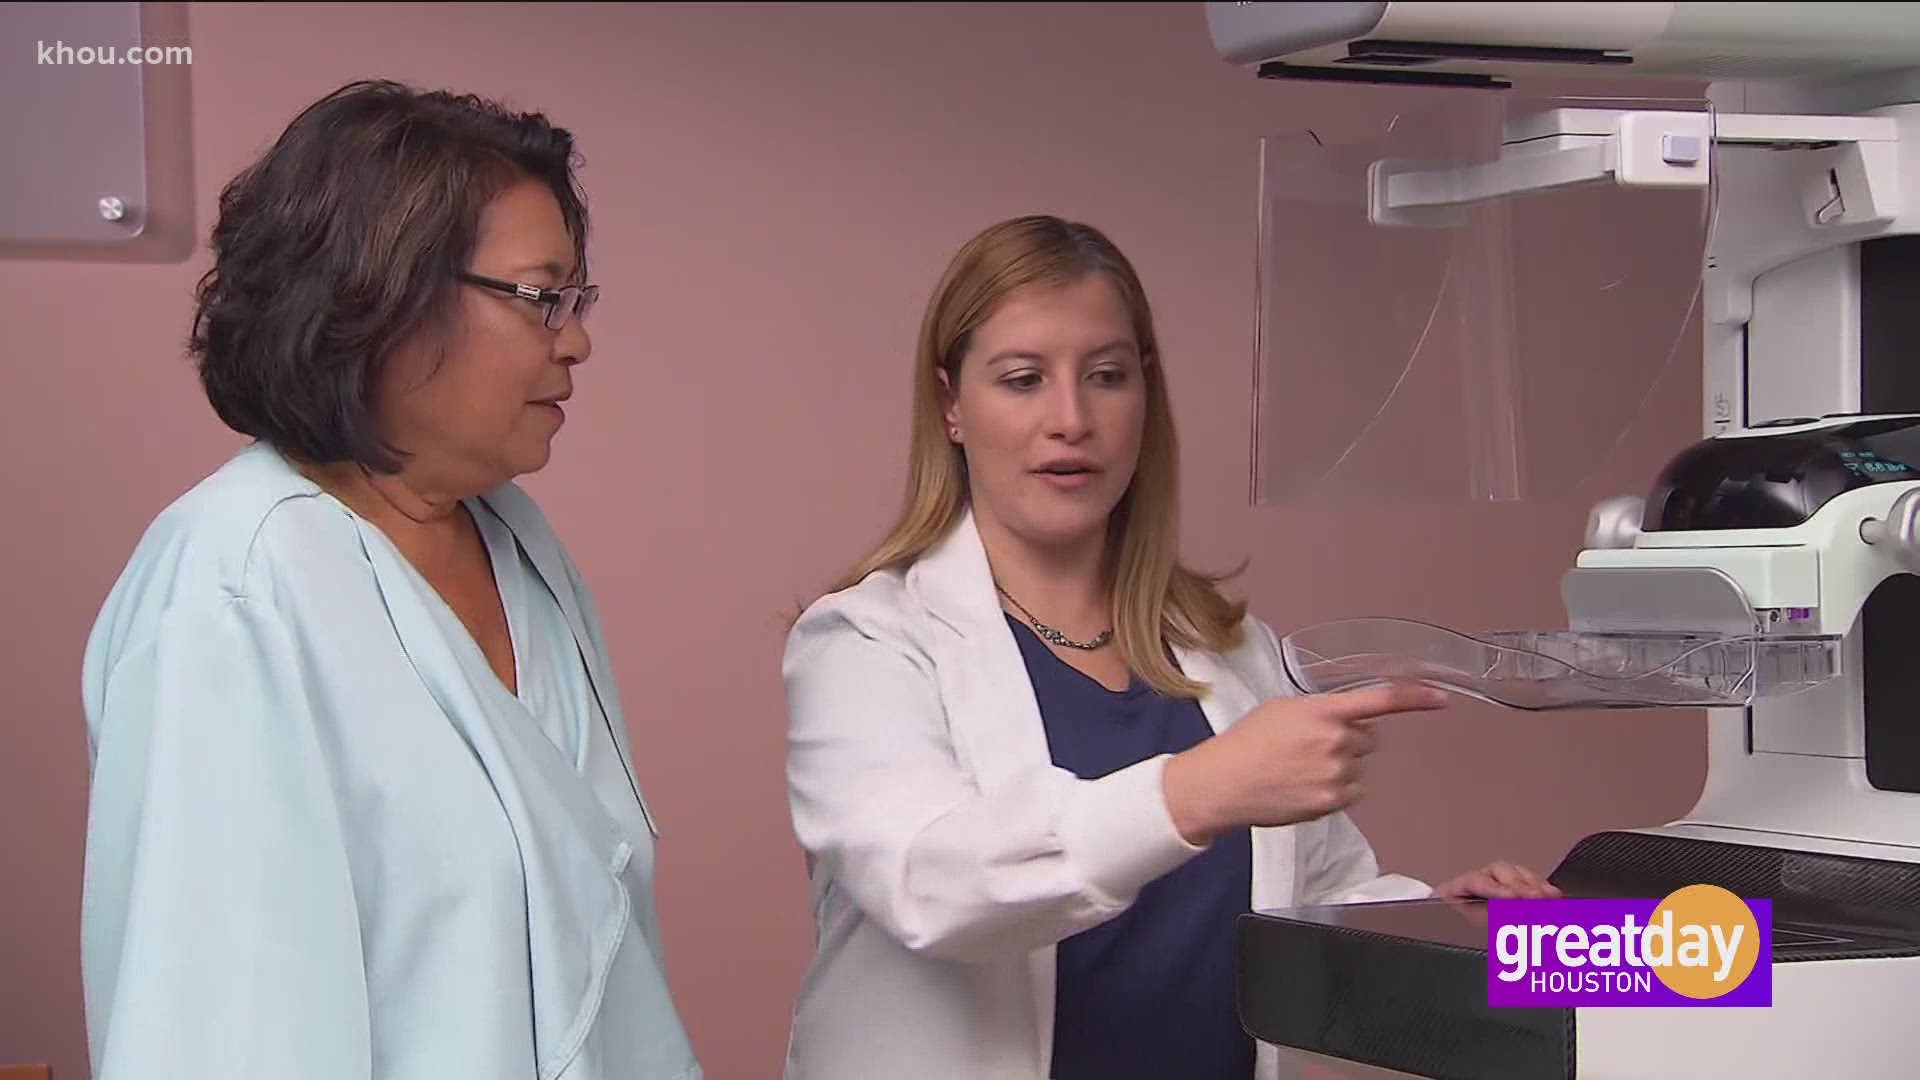 Dr. Stephen Rose, Medical Director with Tops Comprehensive Breast Center shares the latest technology for mammograms to help beat and survive breast cancer